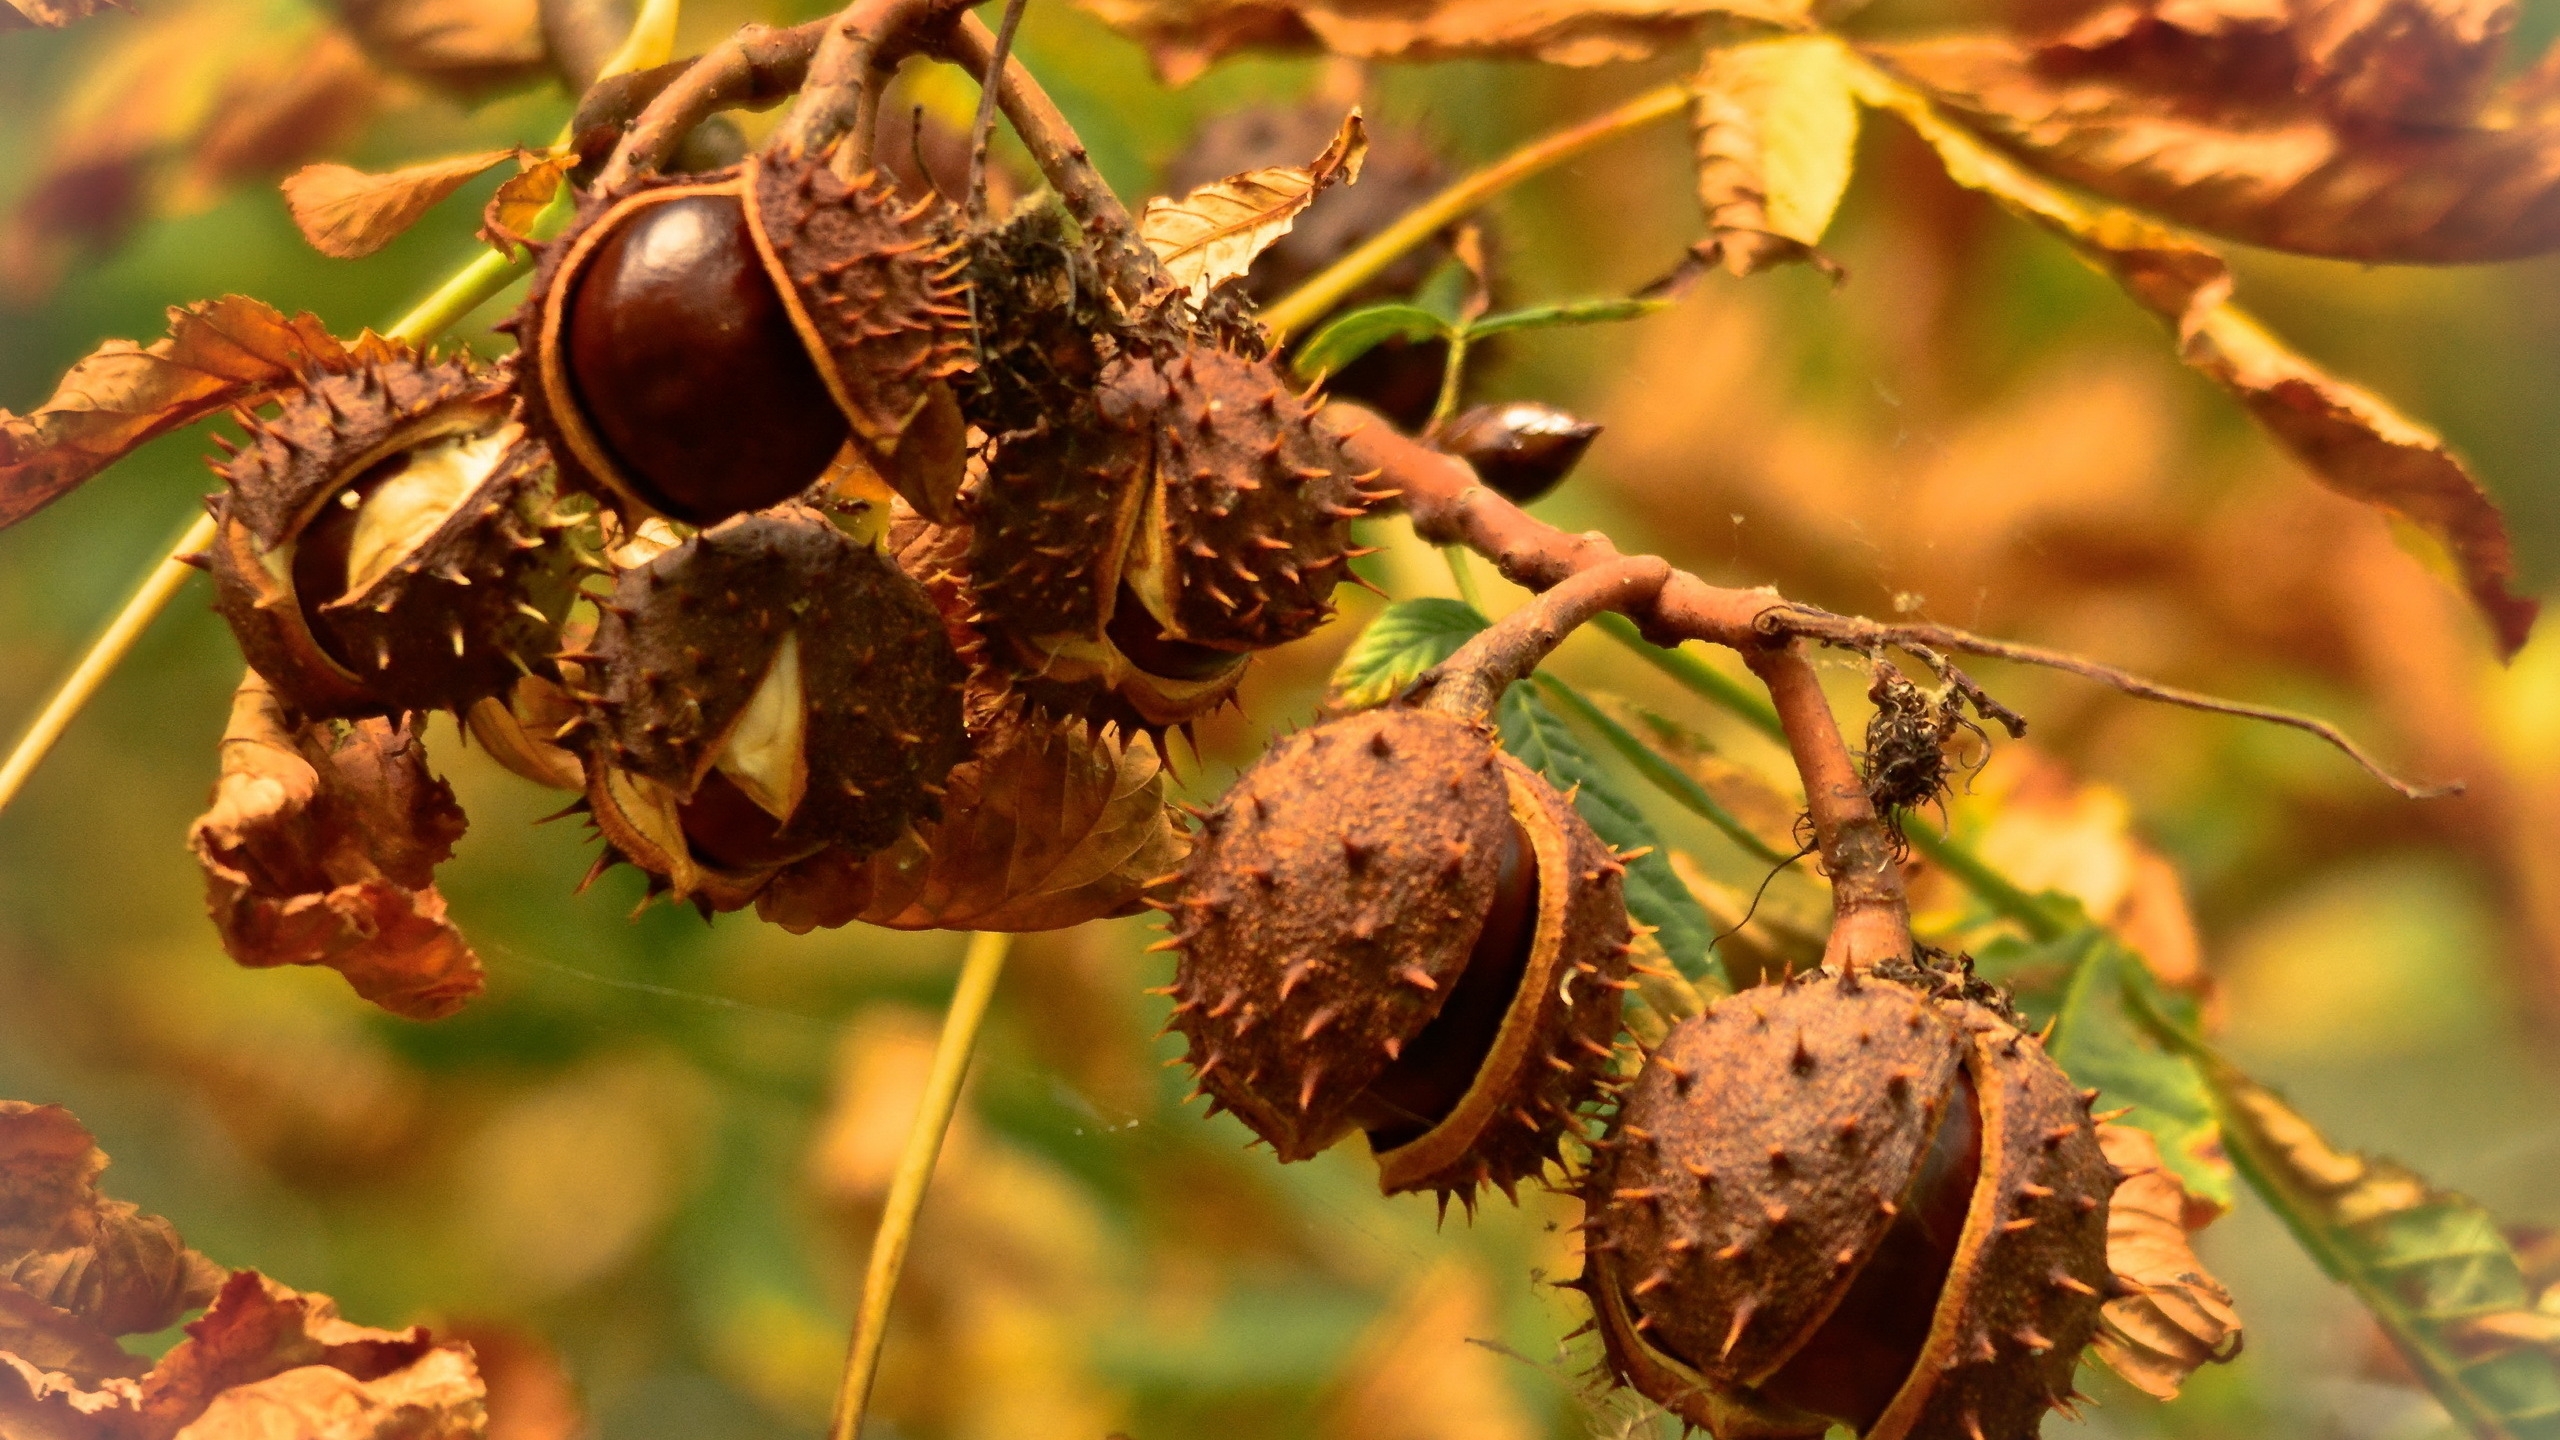 Chestnuts for 2560x1440 HDTV resolution